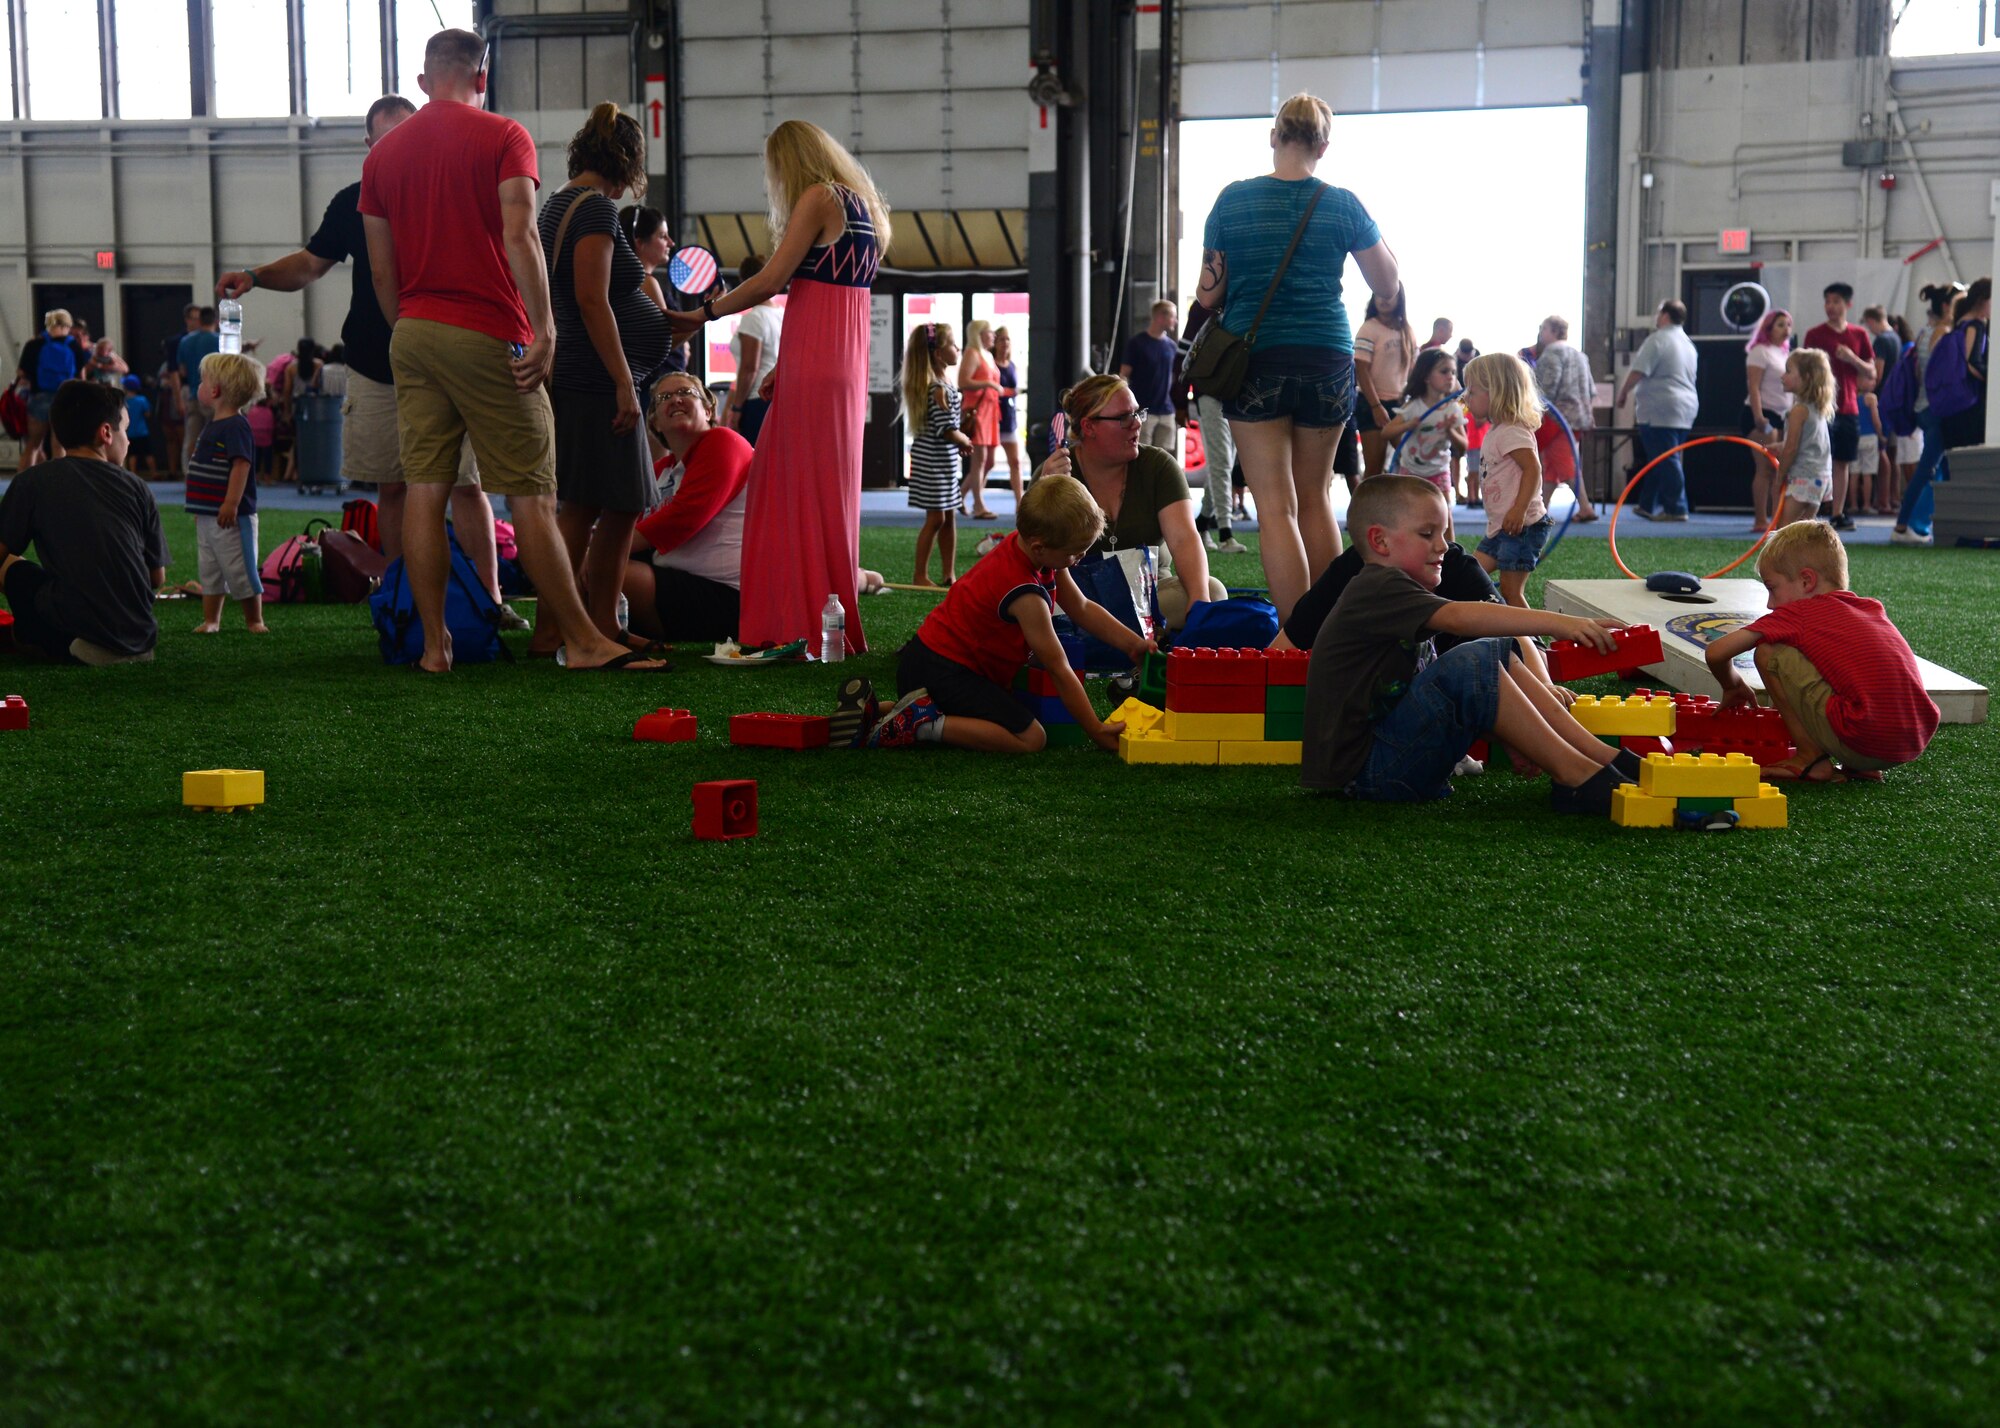 Children and families from Ellsworth Air Force Base, South Dakota, play with a set of building blocks during the Back-to-School Roundup, August 18, 2018. This event was a fun way to kick off the school year with games and free school supplies for military families. (U.S. Air Force photo by Senior Airman Denise M. Jenson)